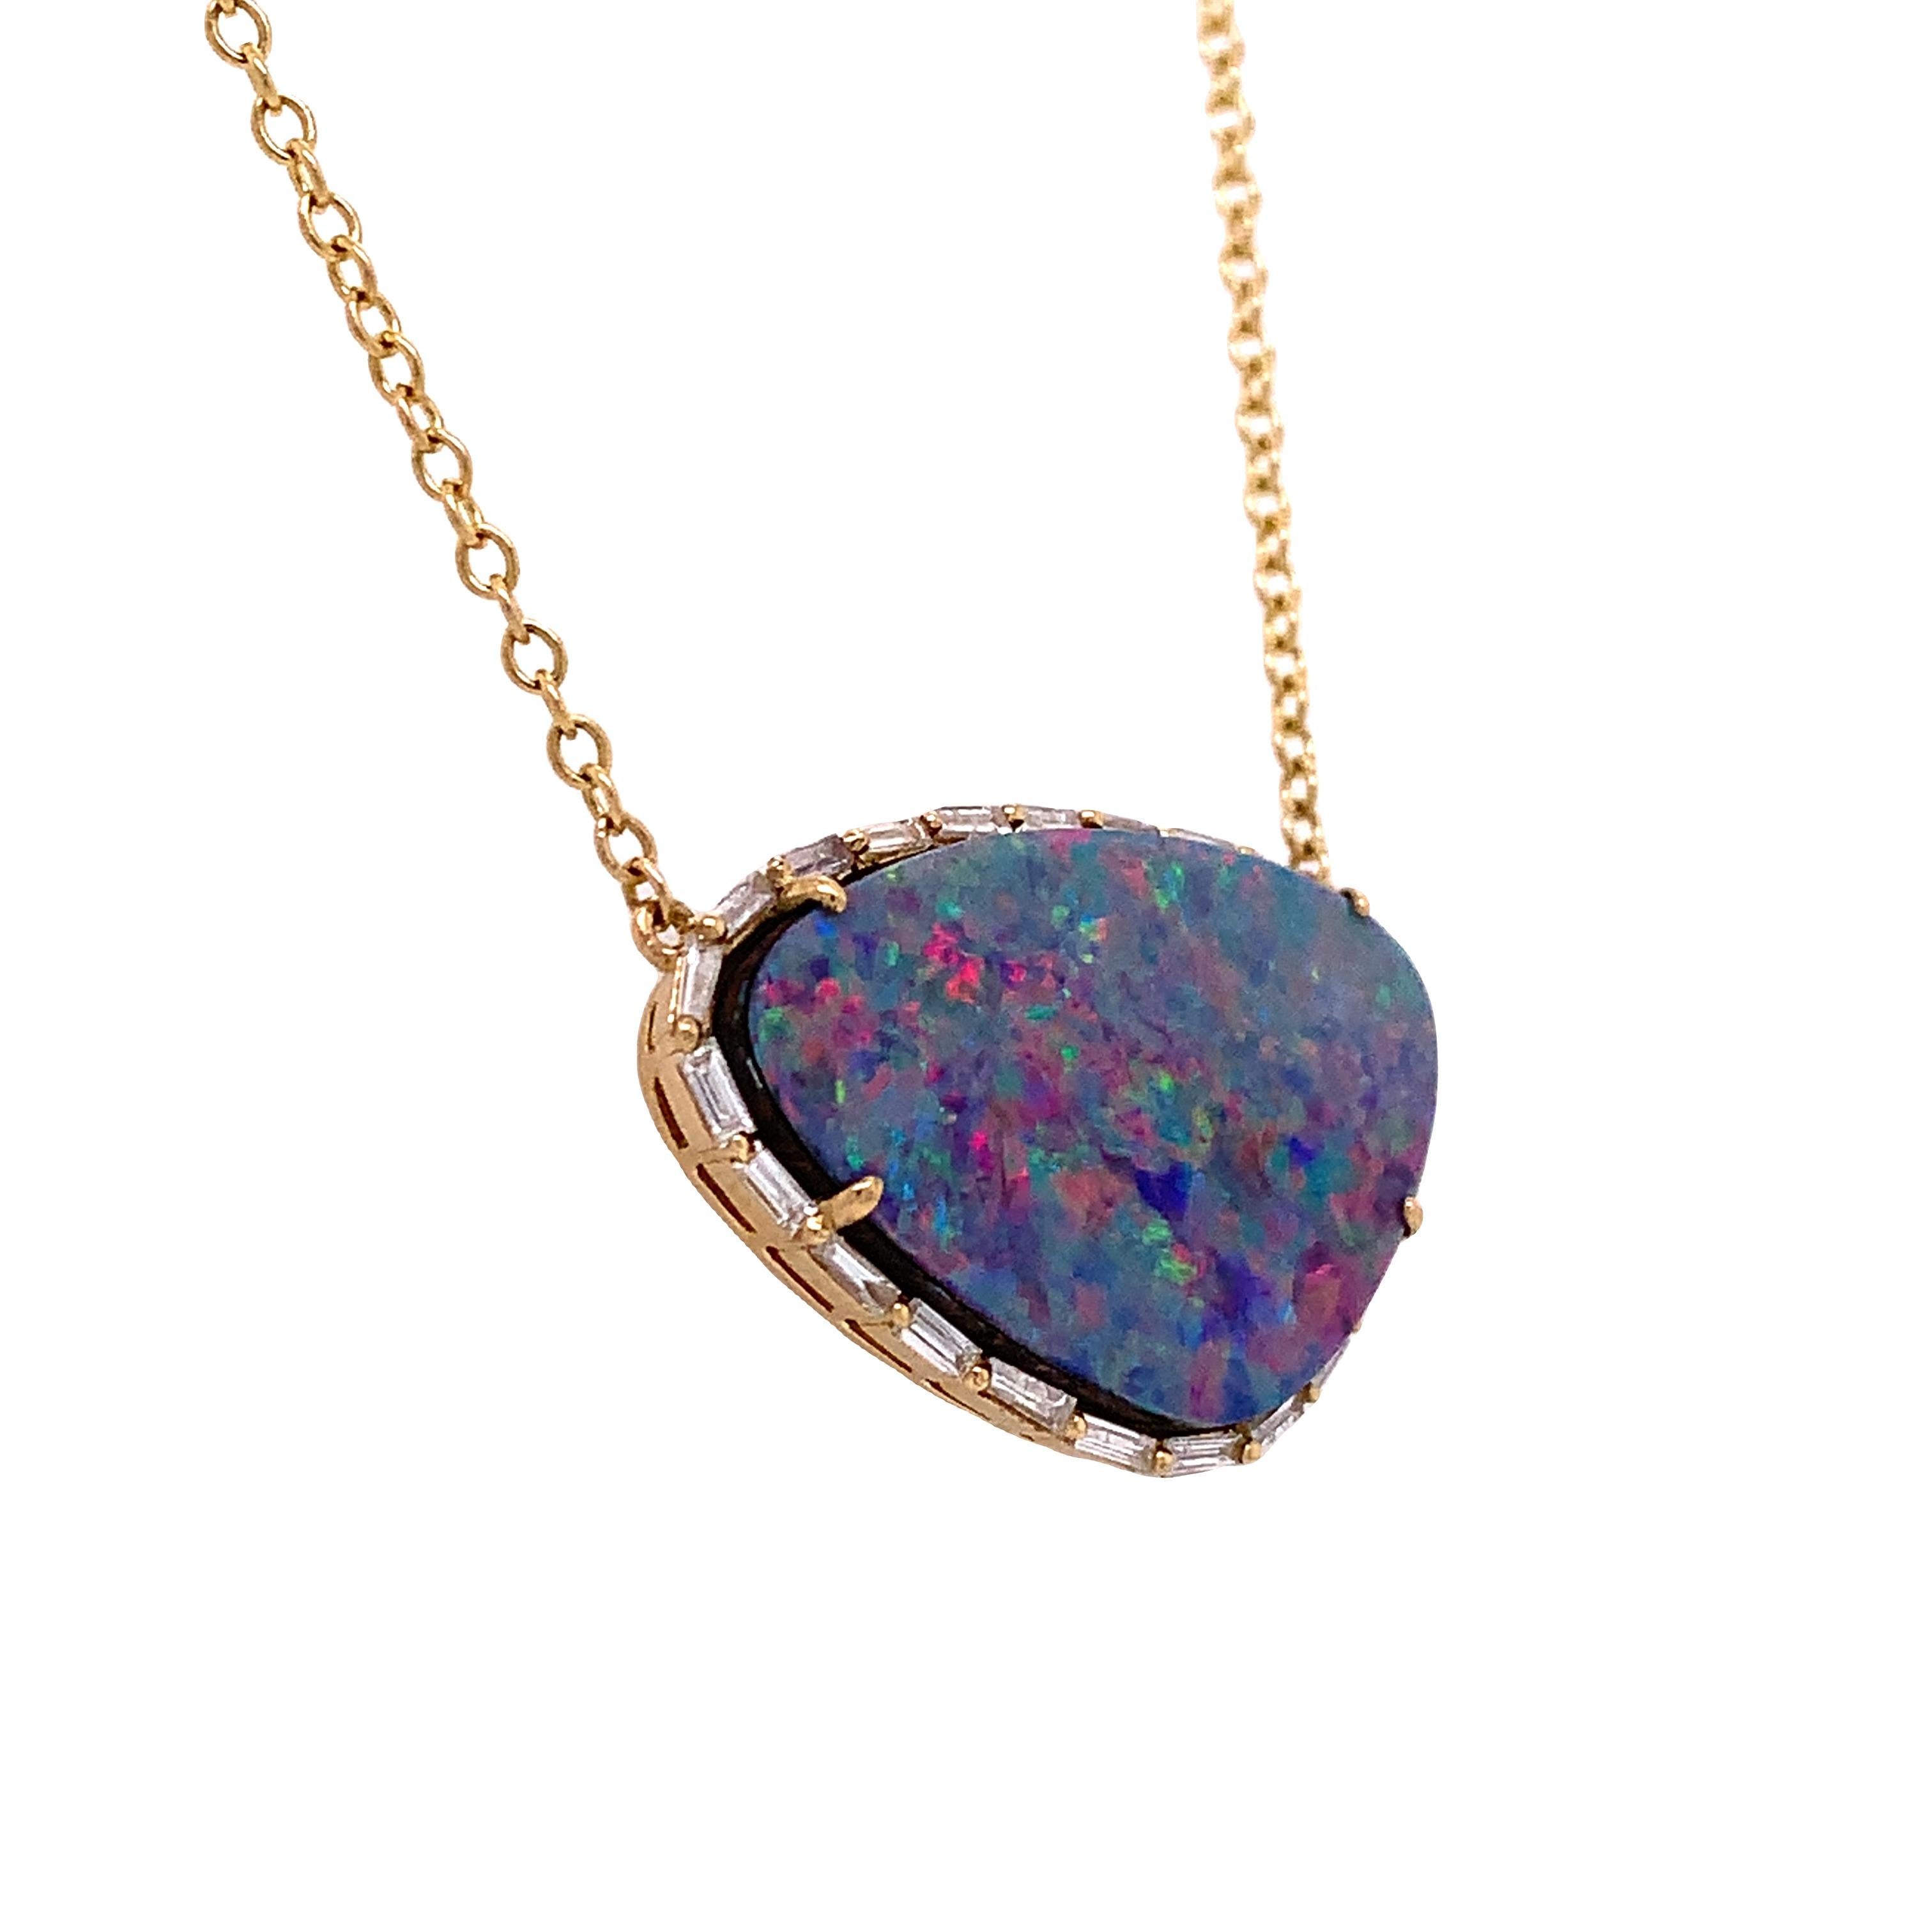 18K Yellow Gold
Opal: 8.82ct total weight.
Diamond: 0.33ct total weight.
All diamonds are G-H/SI stones.
16